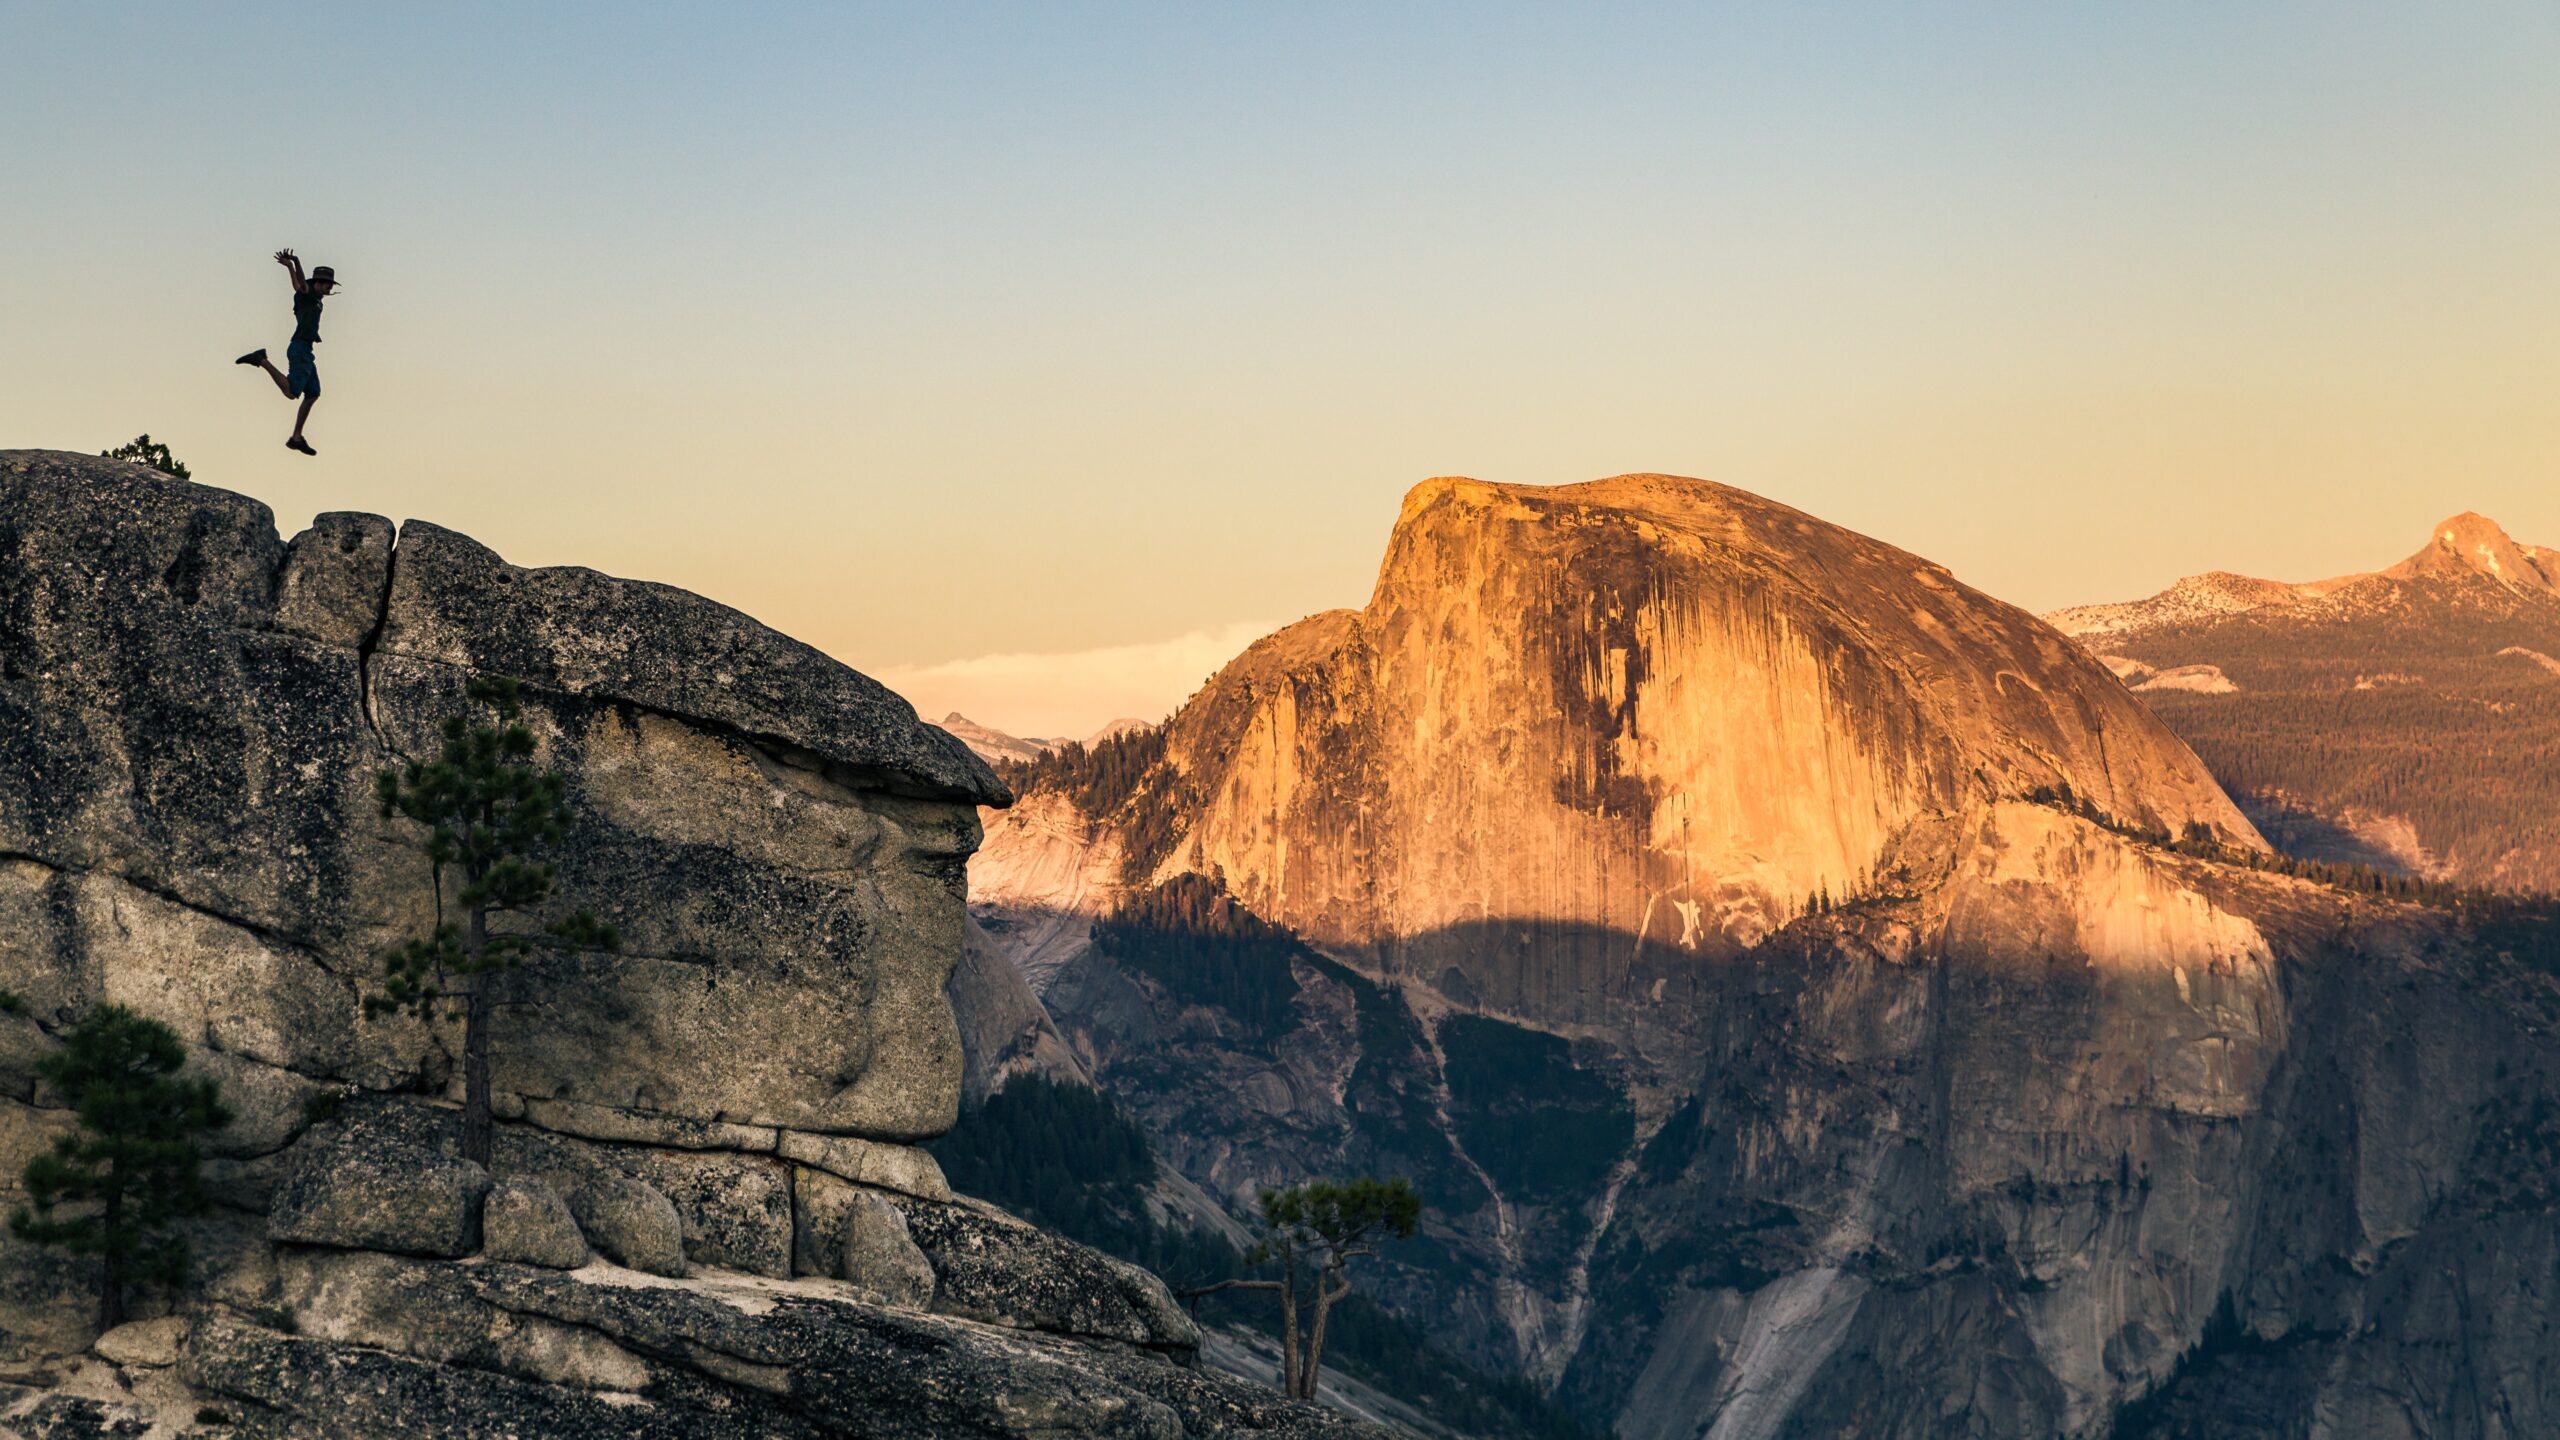 A person jumps on a cliff face in Yosemite at sunset